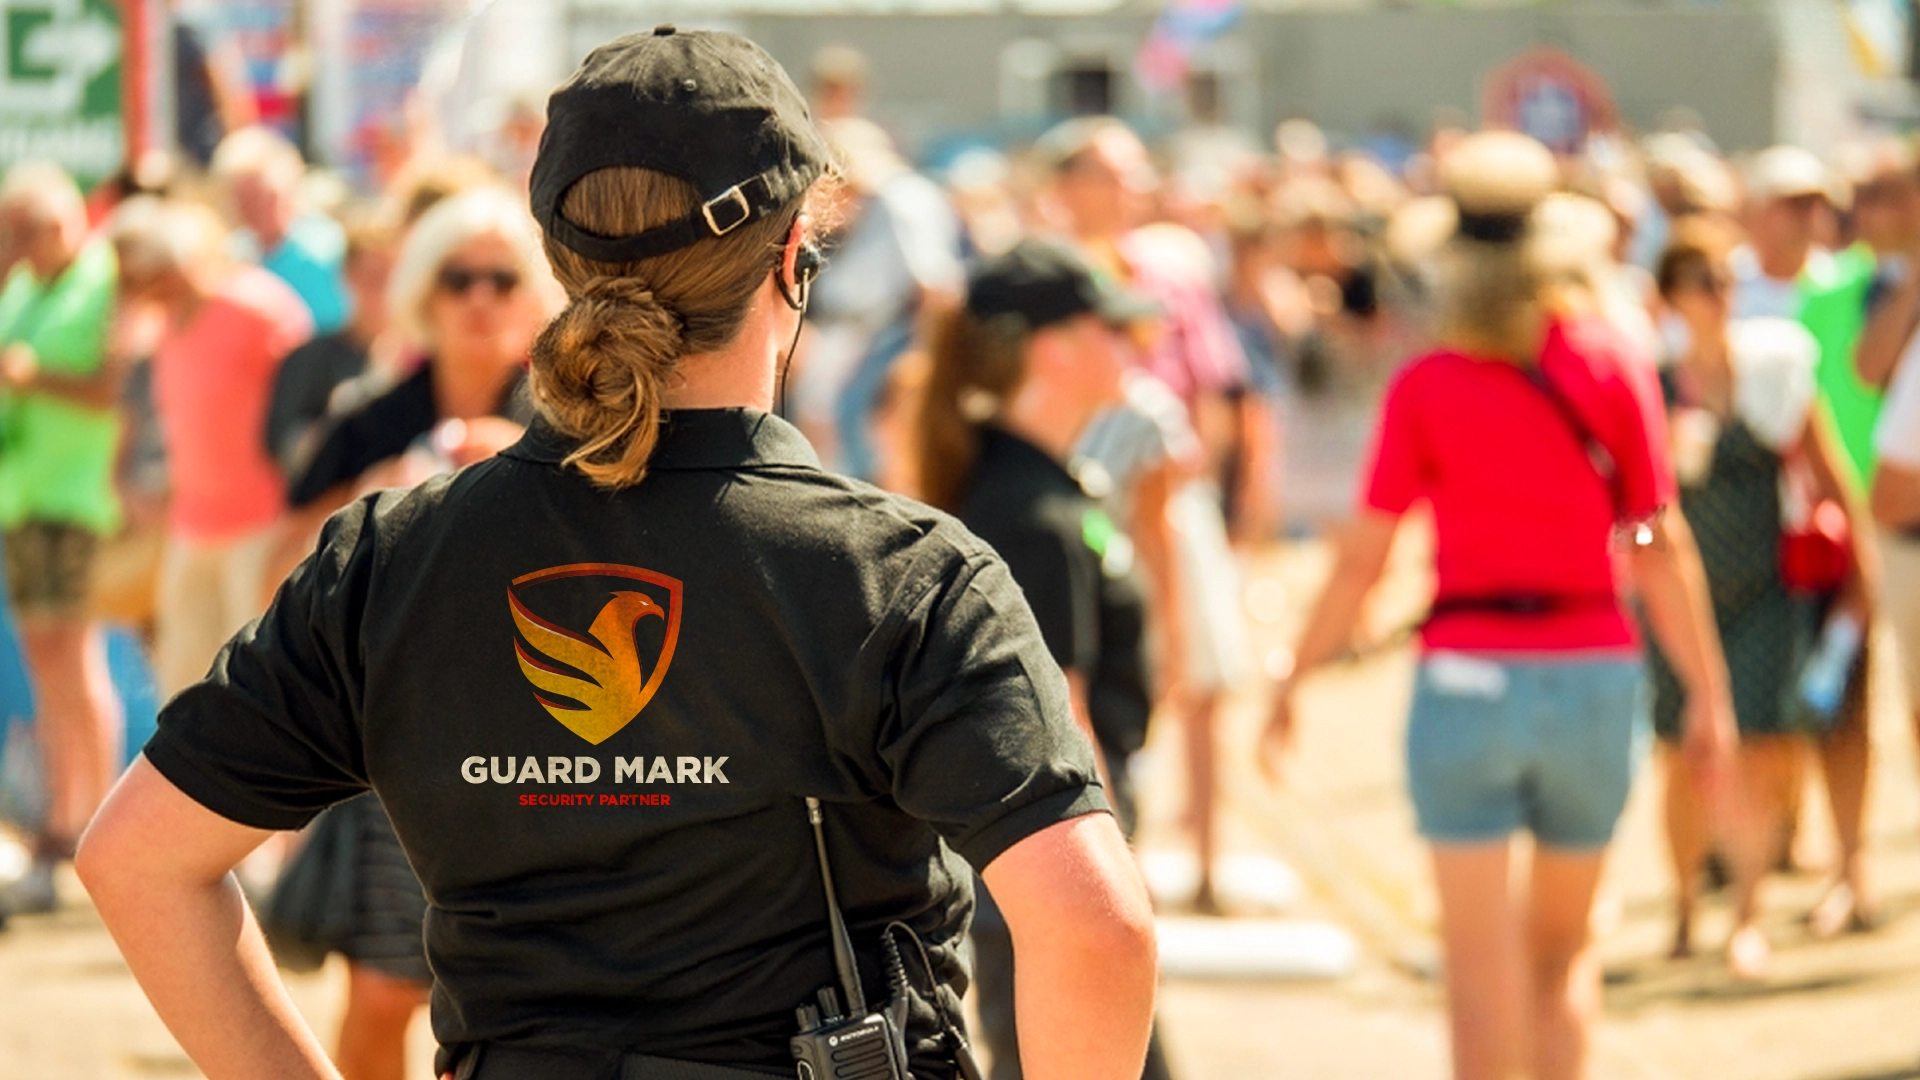 Female UK event security guard in Guard Mark uniform ensures safety at sporting and music festivals.